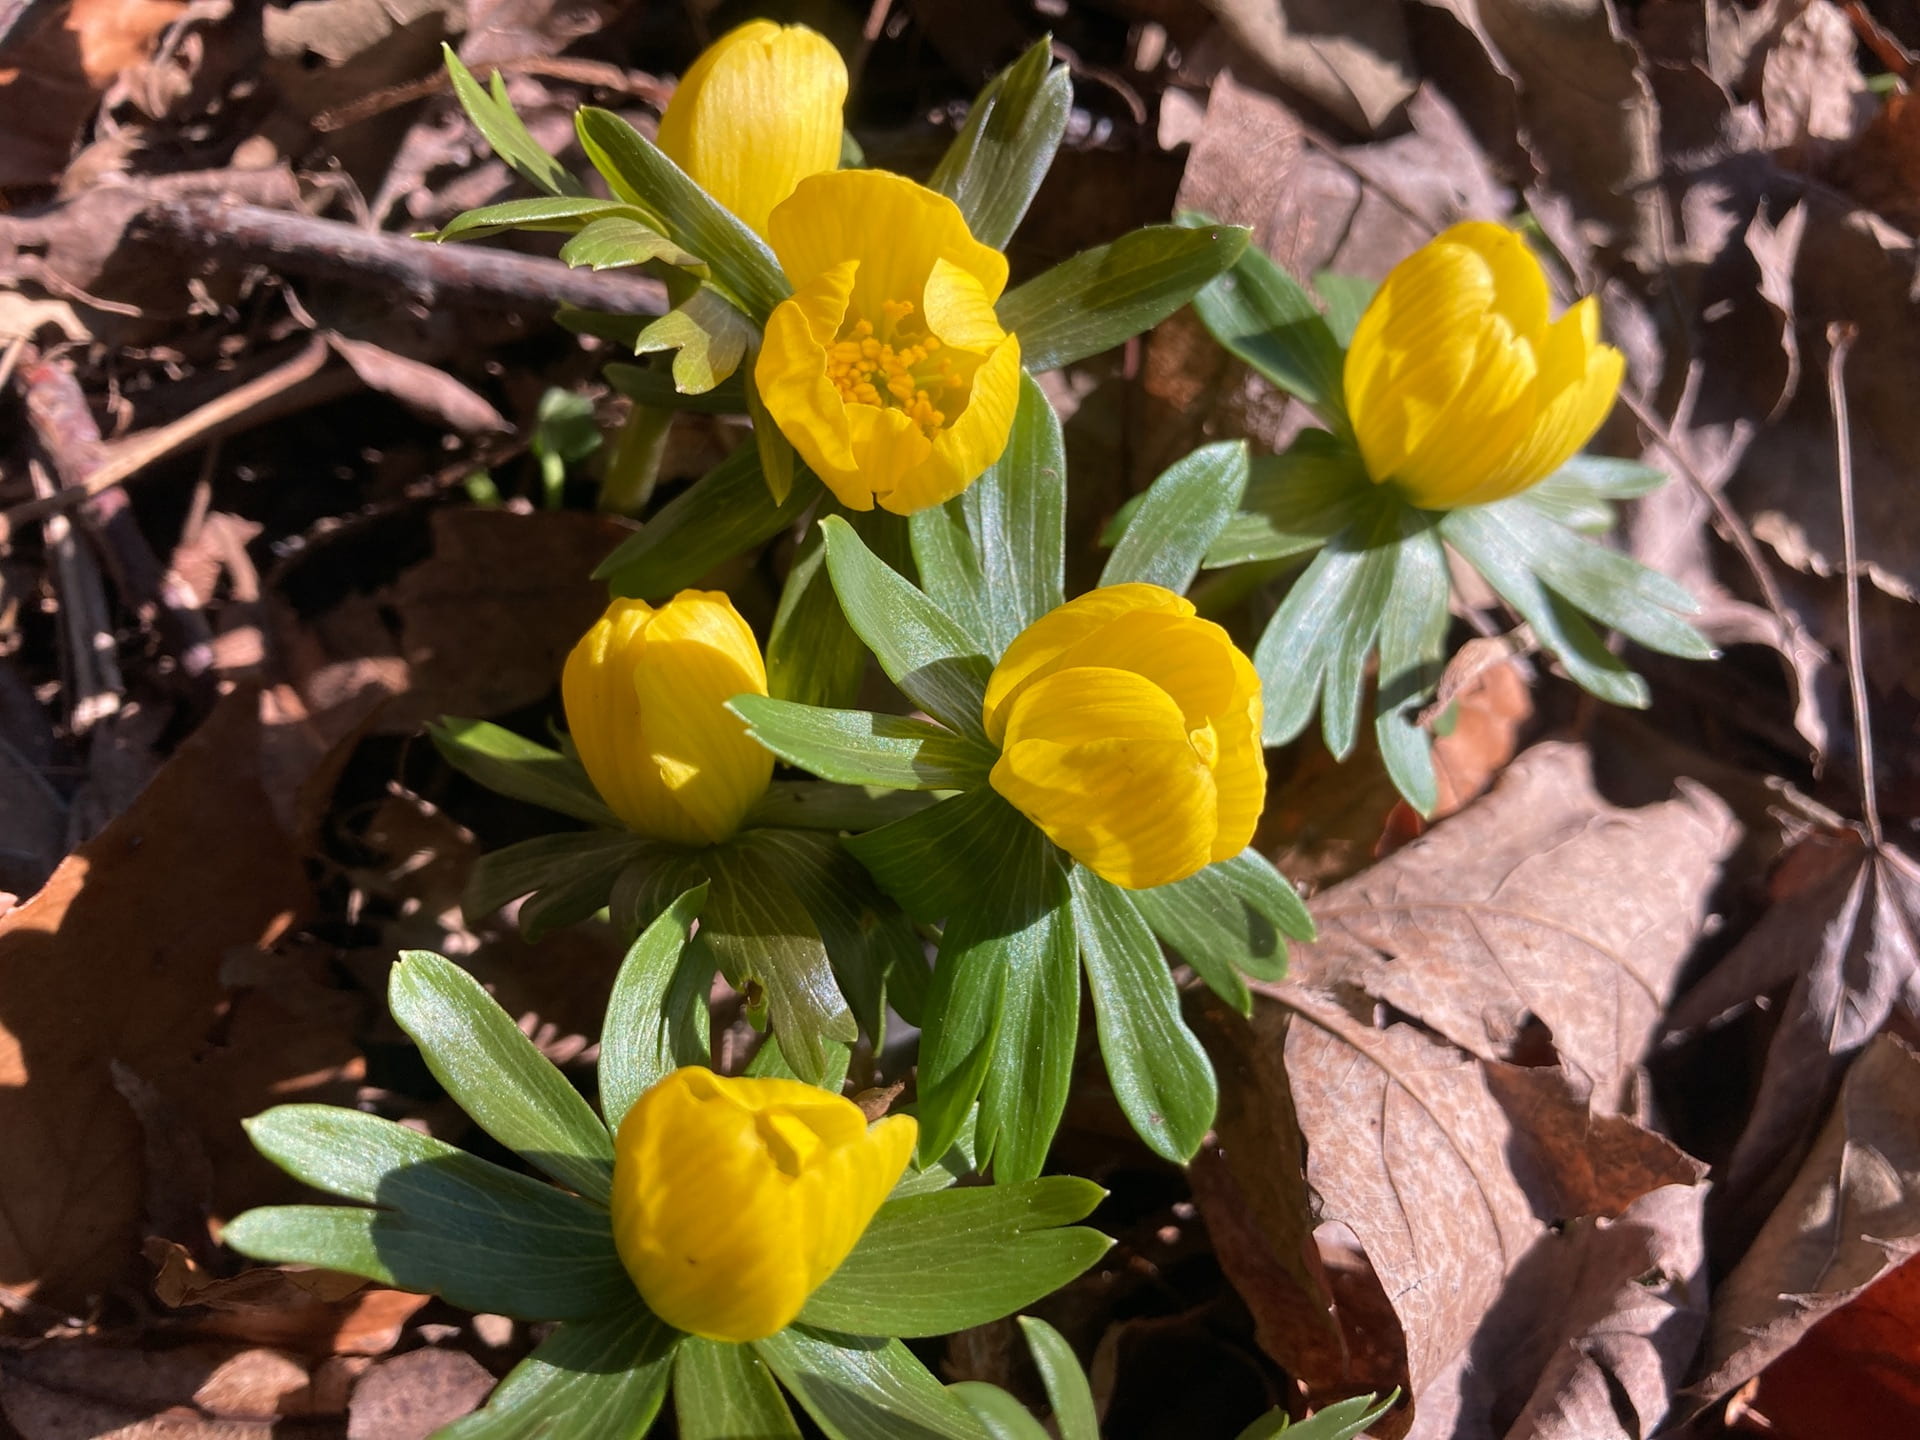 Eranthis hyemalis making an appearance after the snow melted away.